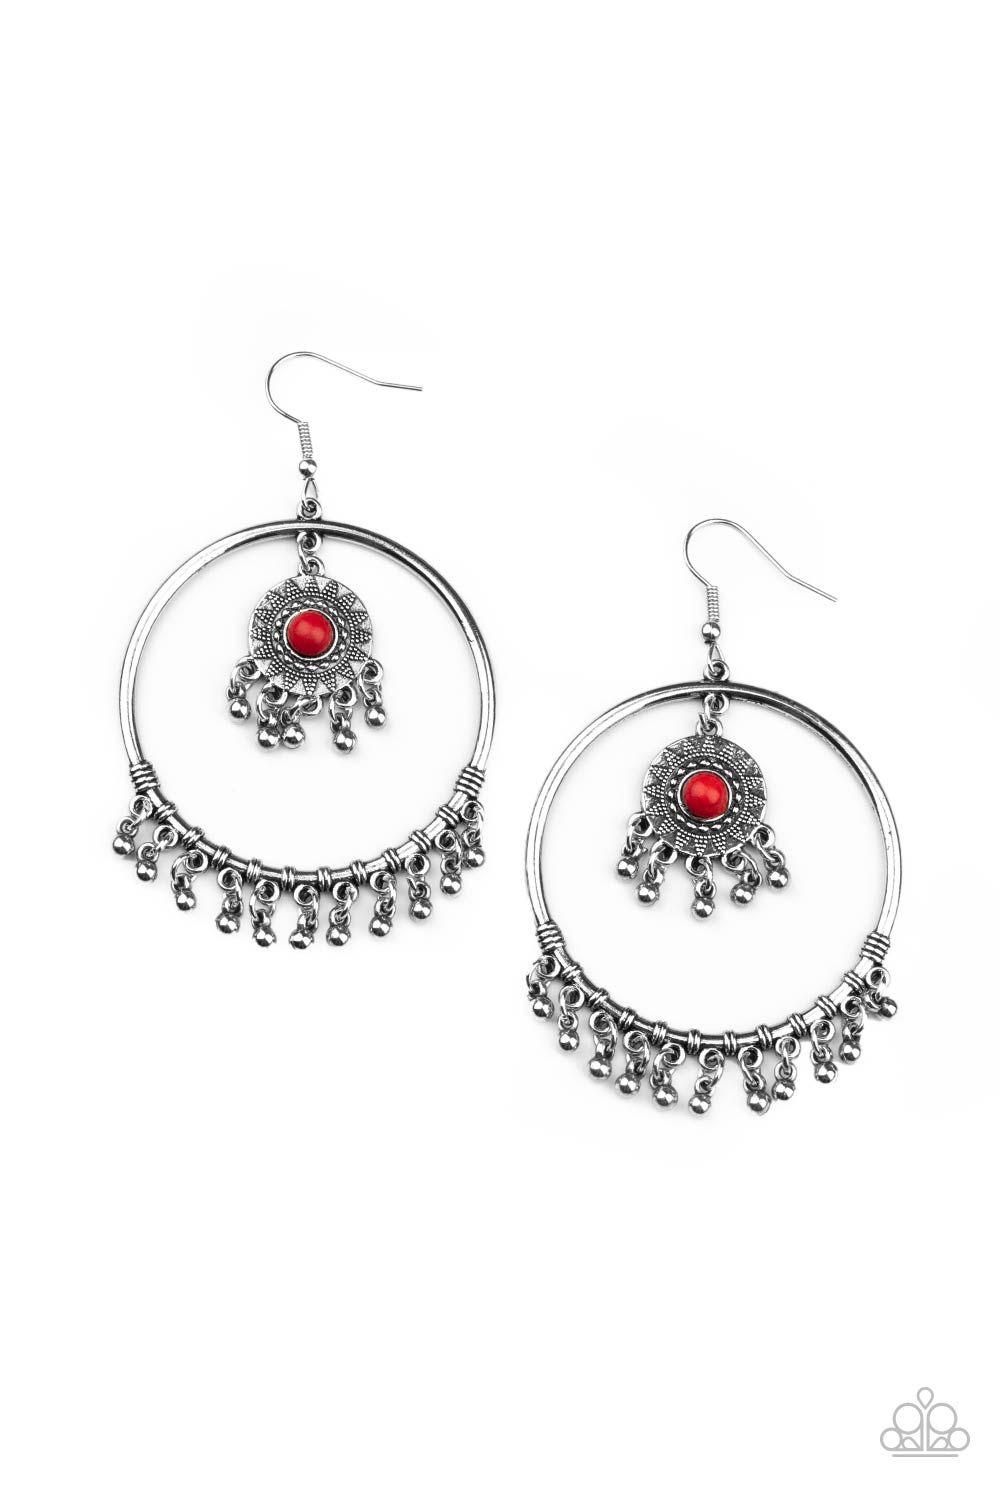 Sunny Equinox - Red Earrings - Paparazzi Accessories